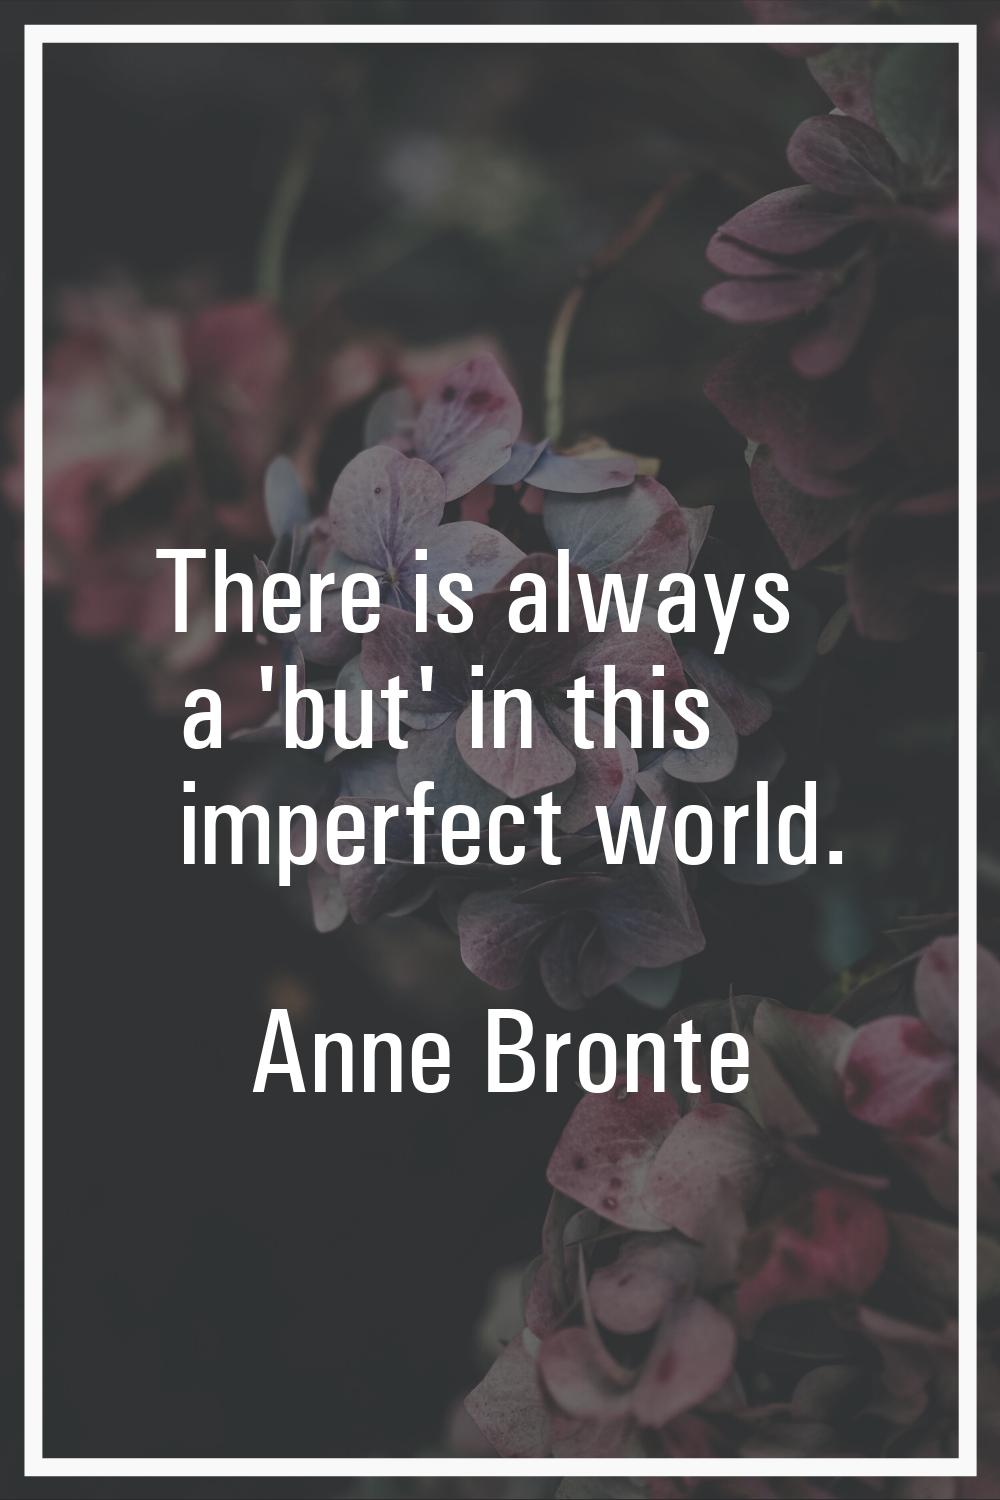 There is always a 'but' in this imperfect world.